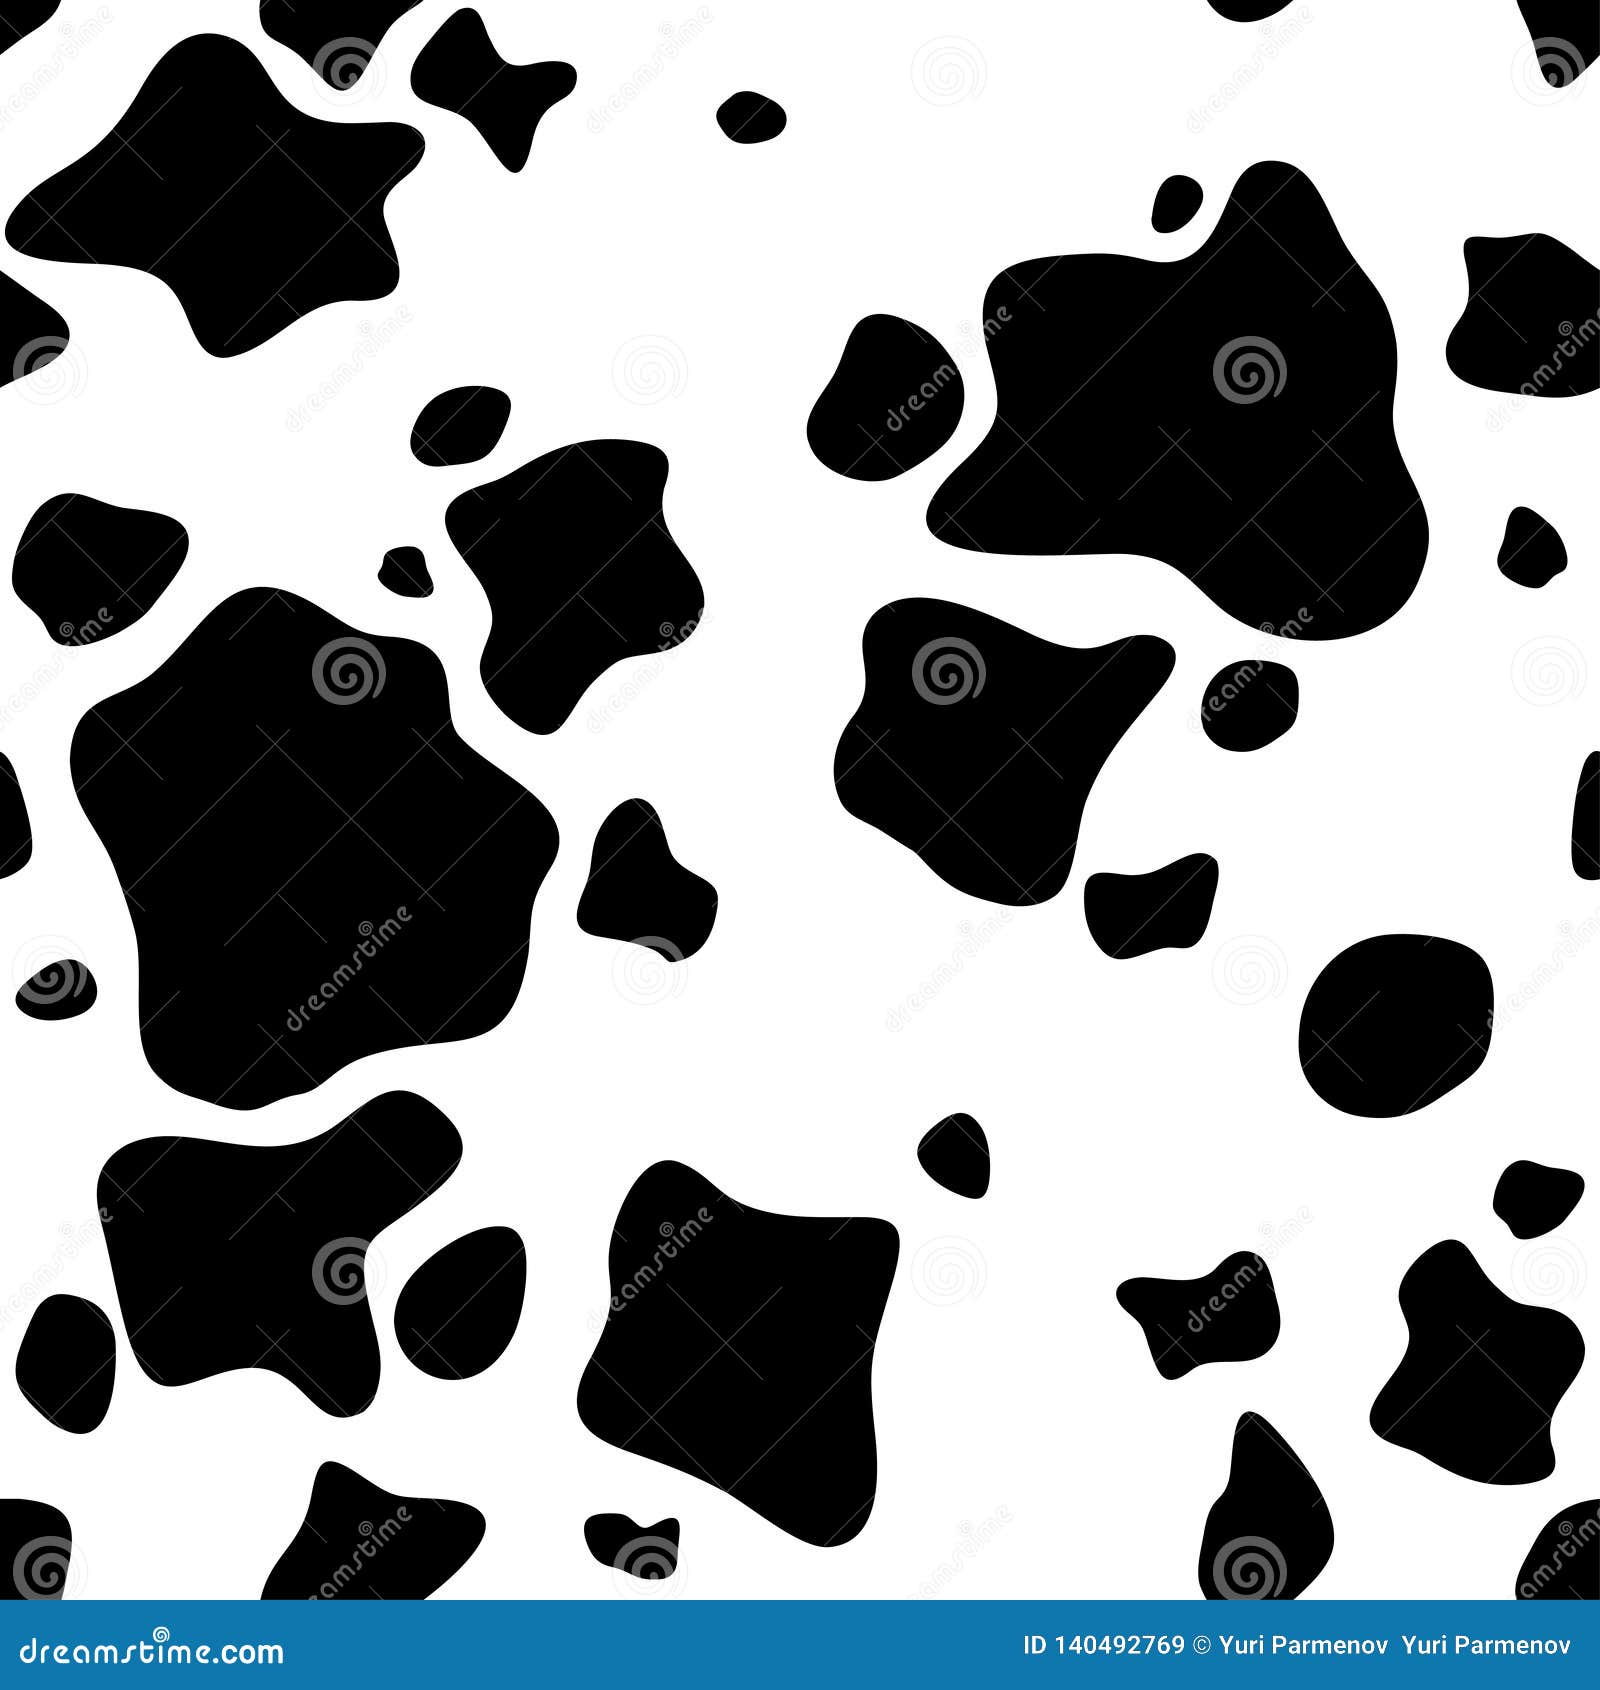 cow or dalmatian. spots. black and white. animal print, texture.  background